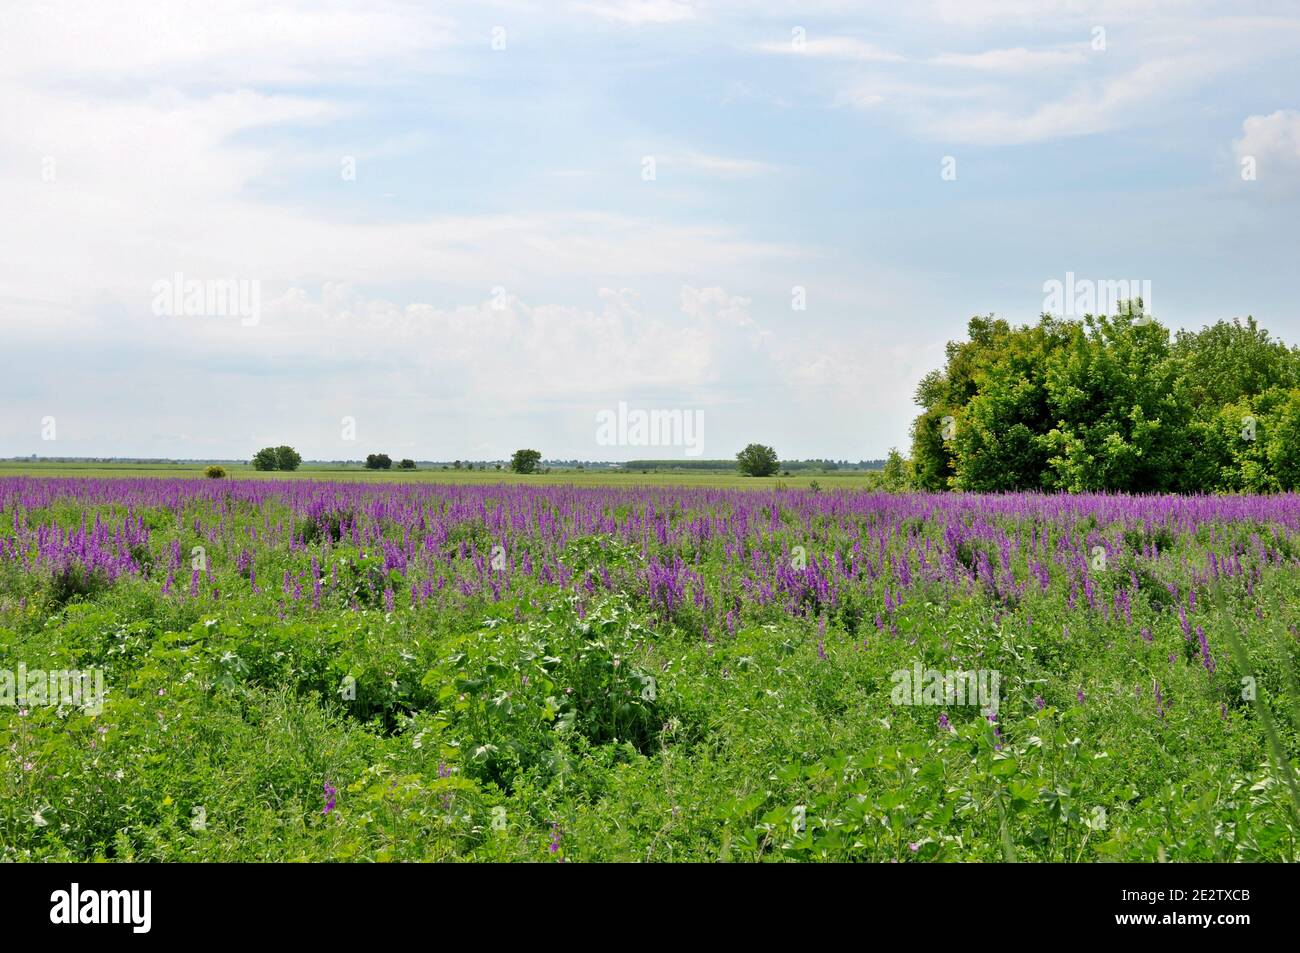 Landscape of an field with green grass and purple salvia flowers and cloudy sky background Stock Photo